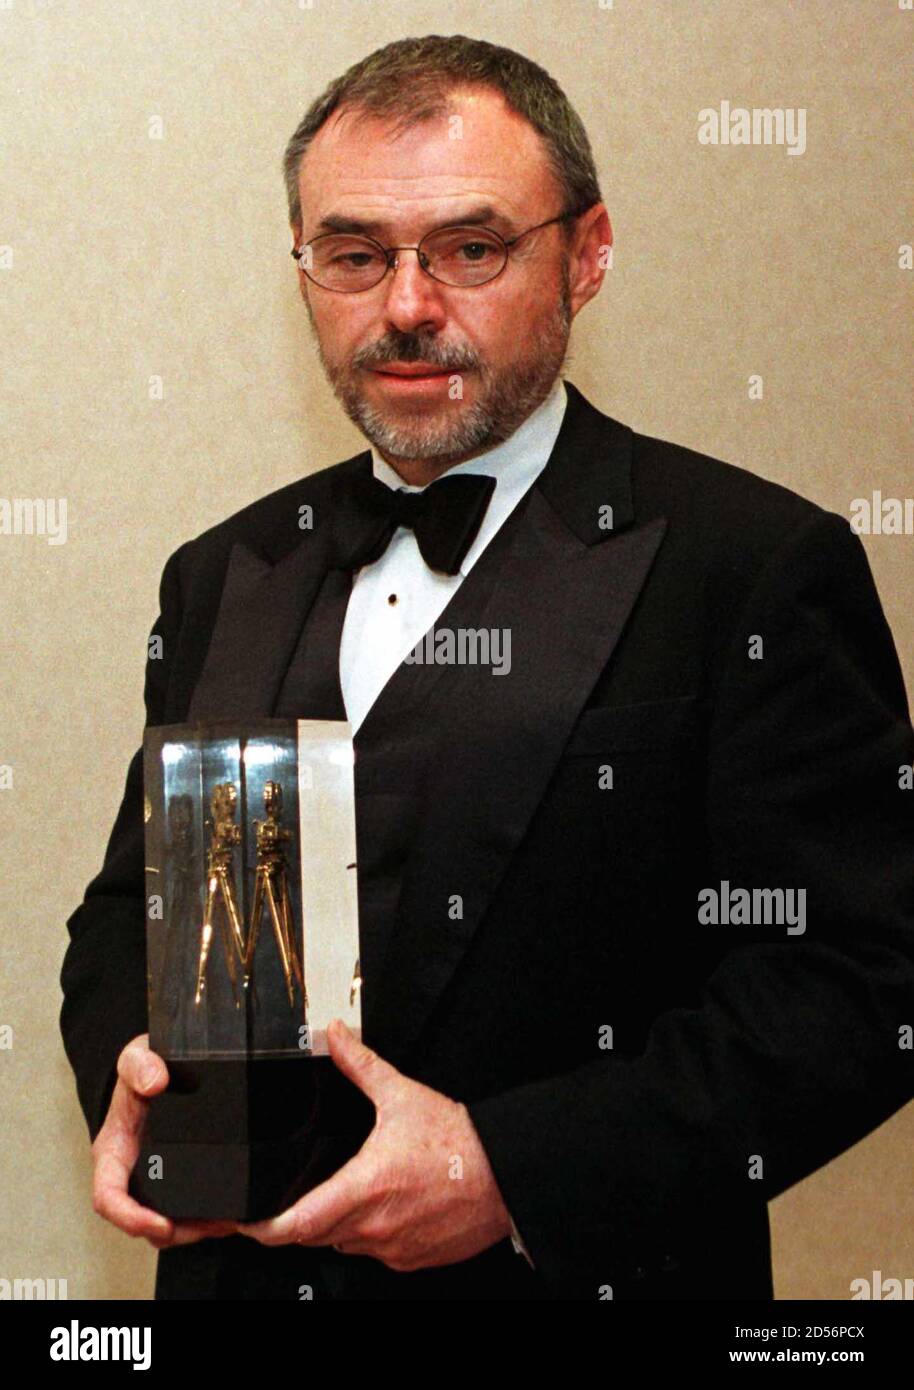 Cinematographer John Toll poses with his American Society of Cinematographers award at the 13th annual Awards for Outstanding Achievement in Cinematography Feburary 21, in Los Angeles. Toll is being honored for his graphically visual rendition of 'The Thin Red Line'.  CFM/ME Stock Photo